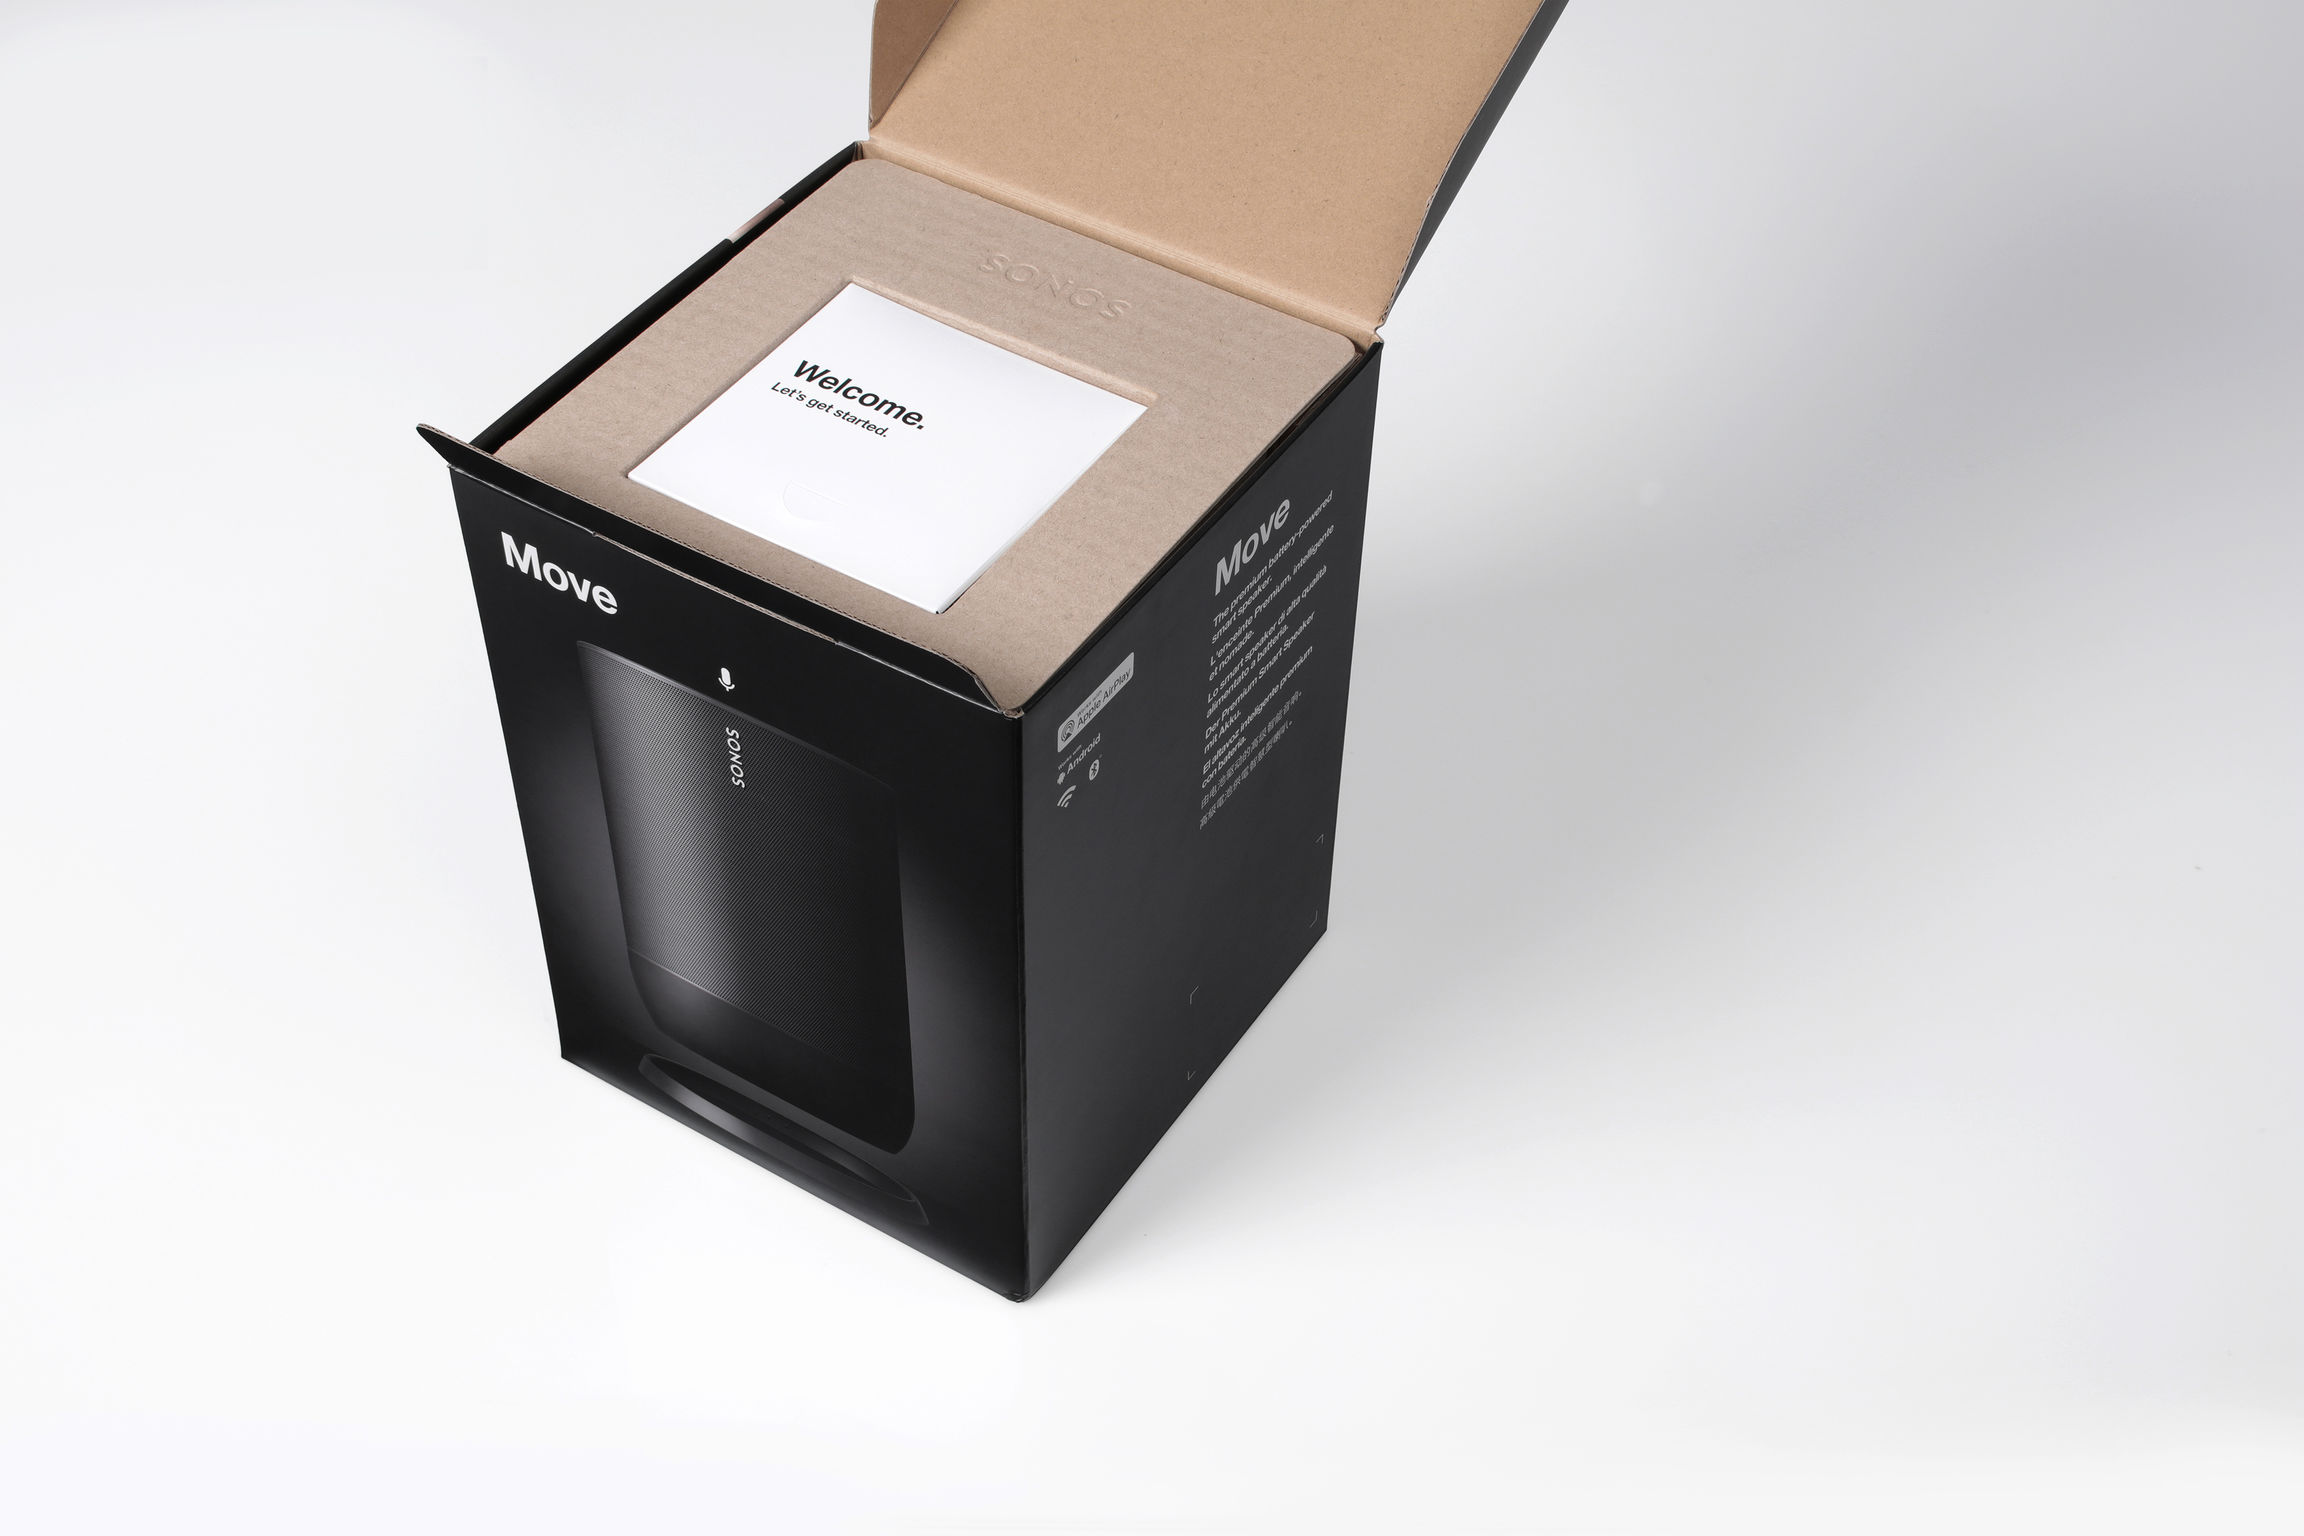 Sonos Move Packaging